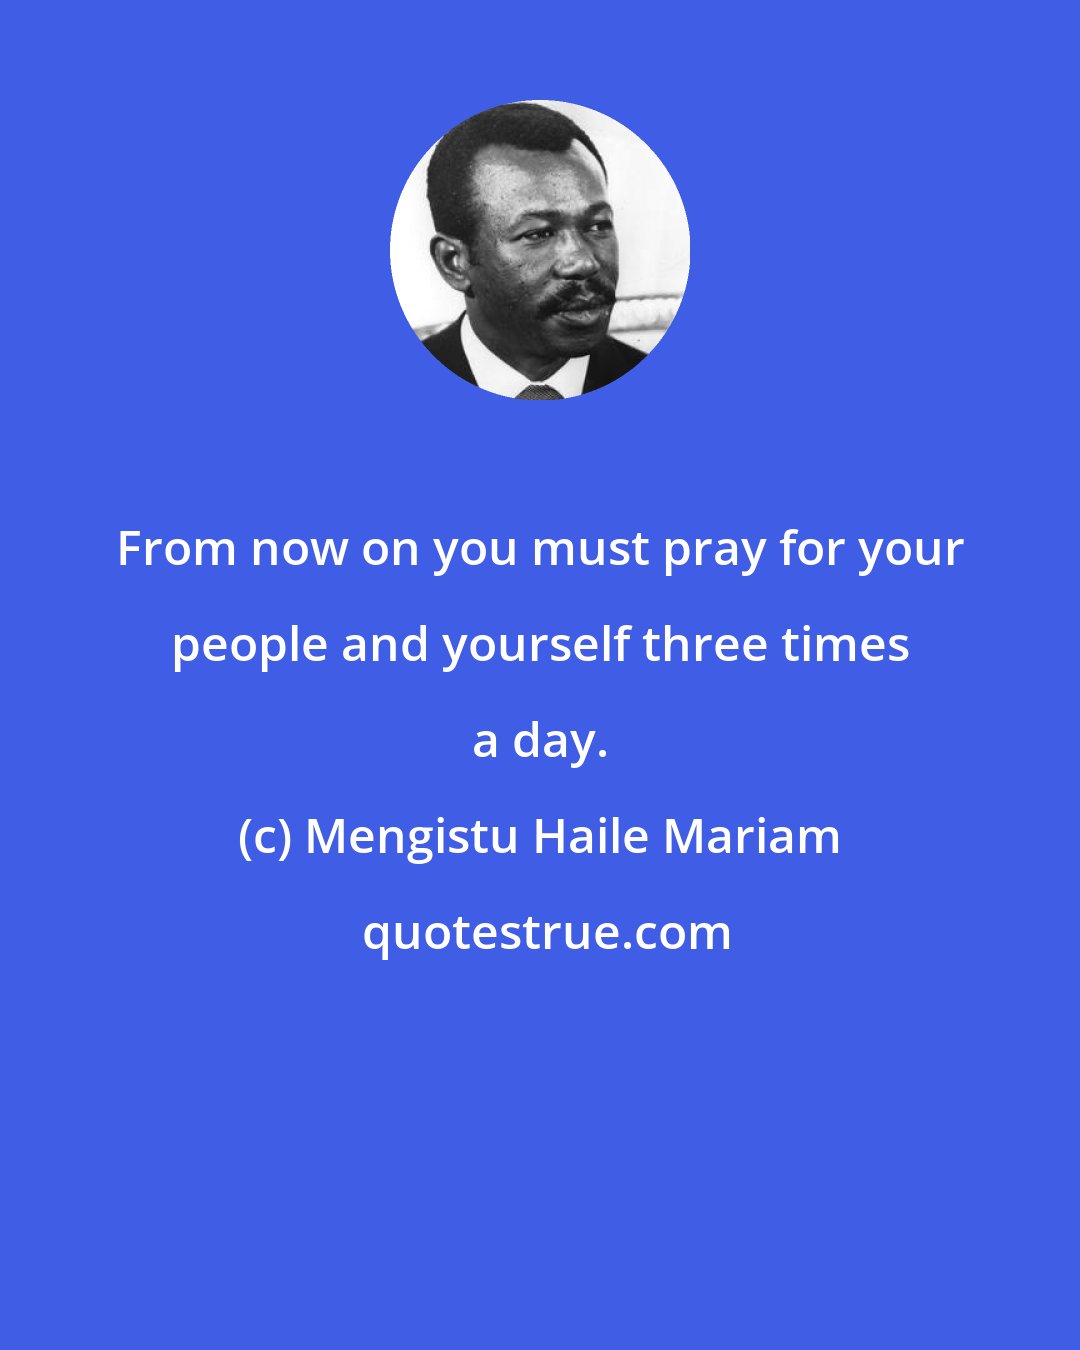 Mengistu Haile Mariam: From now on you must pray for your people and yourself three times a day.